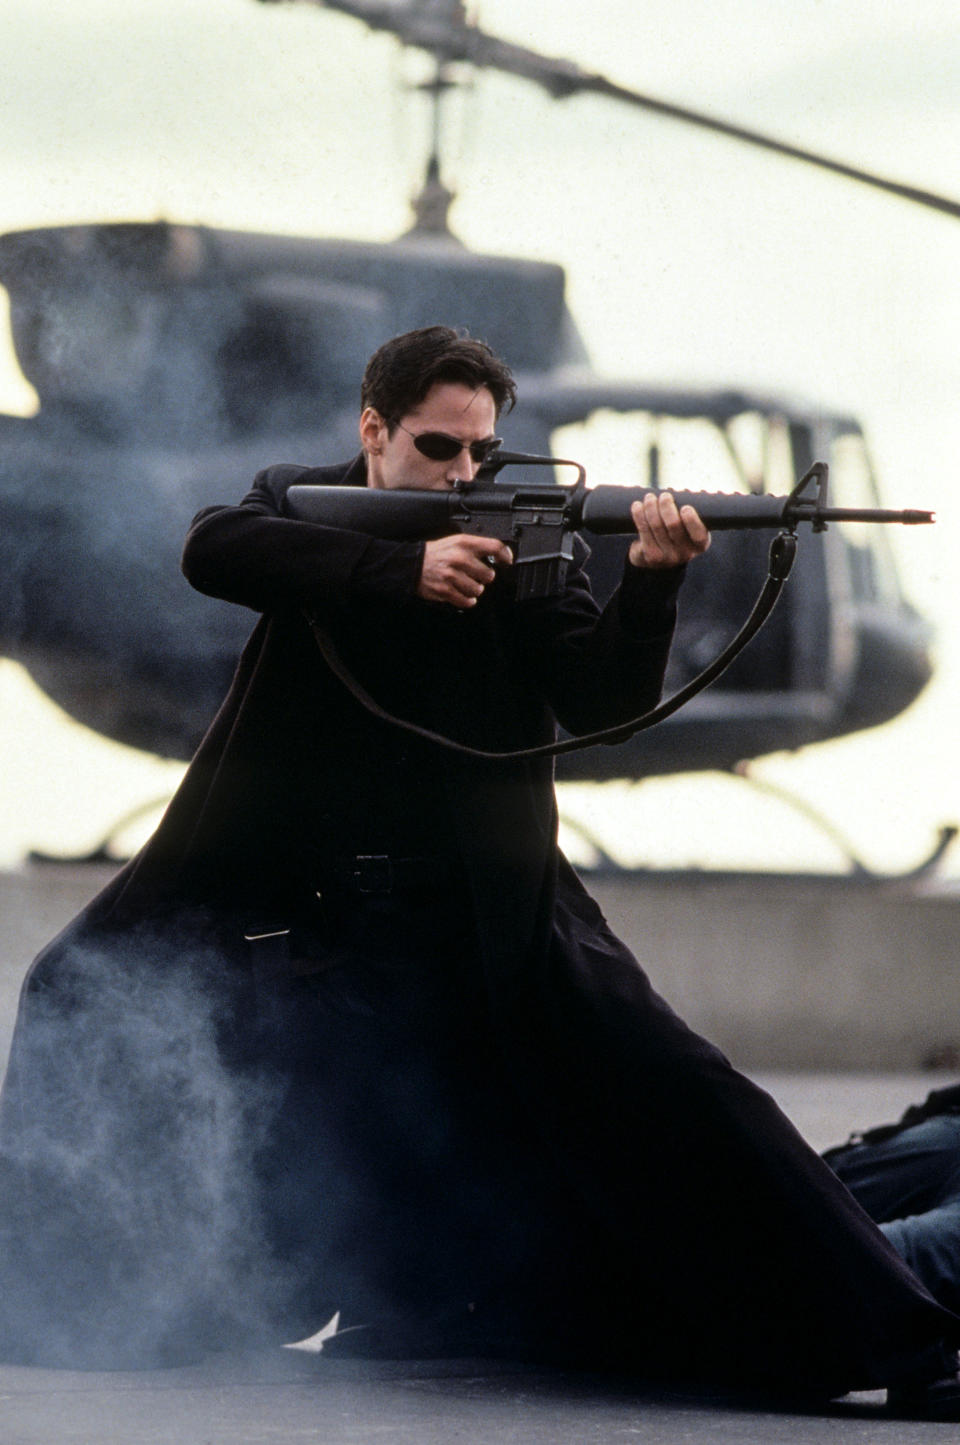 Keanu Reeves as Neo in "The Matrix" wearing a trench coat, sunglasses, and holding a rifle, with a helicopter in the background